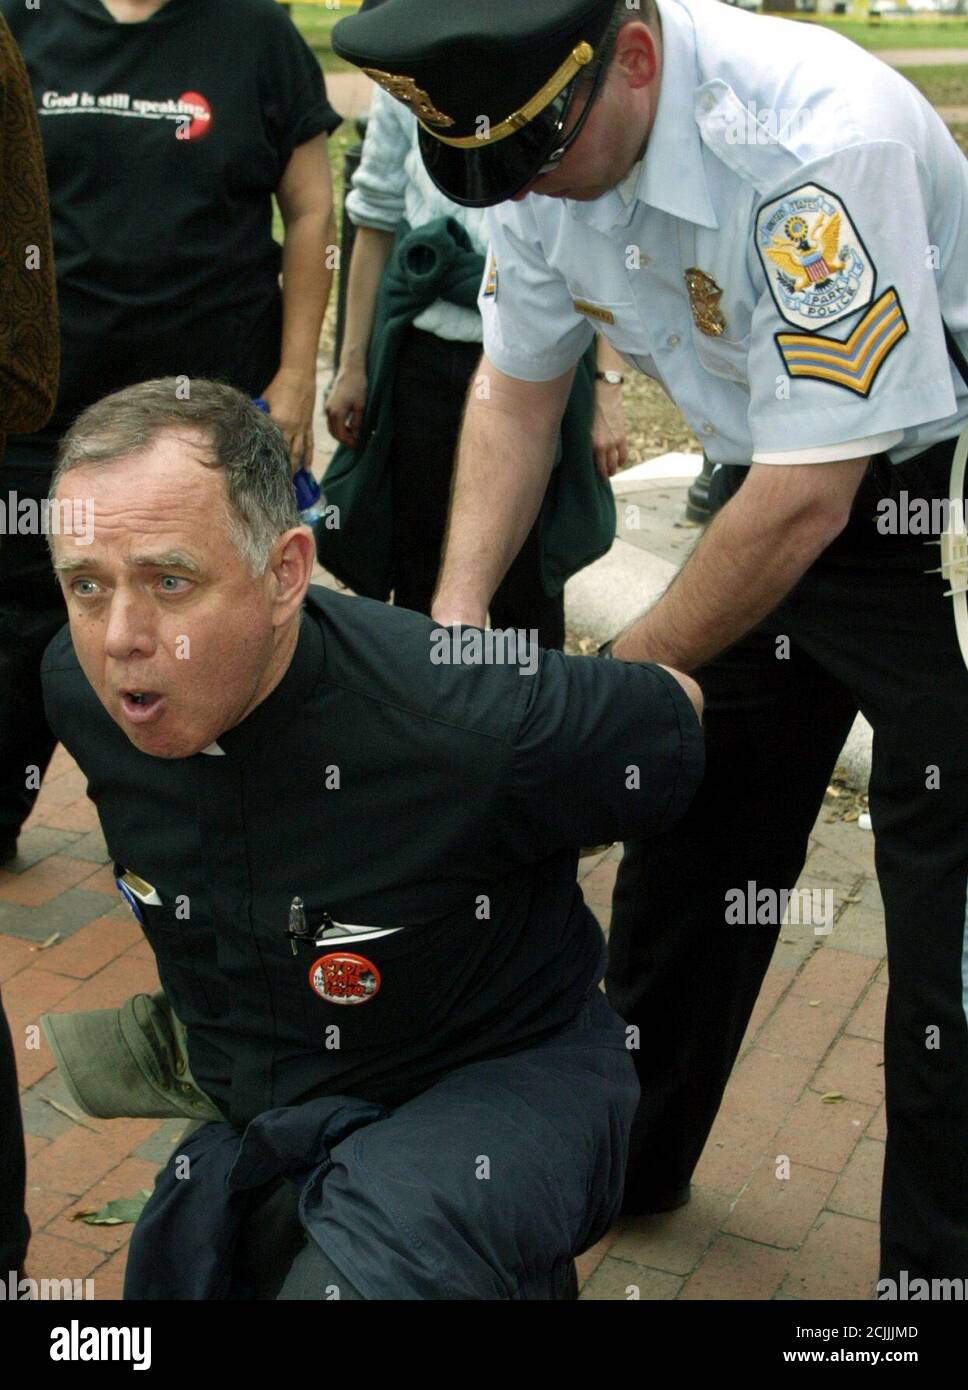 Presbyterian Minister George Taylor, of Hyattsville, Maryland, calls out in protest against the war in Iraq as a U.S. Park police officer arrests him for refusing to leave Lafayette Park, in front of the White House in Washington, March 26, 2003. Religious leaders and members of several peace groups came together for the non-violent civil disobedience action to protest the war in Iraq. REUTERS/Jim Bourg  JRB/SV Stock Photo